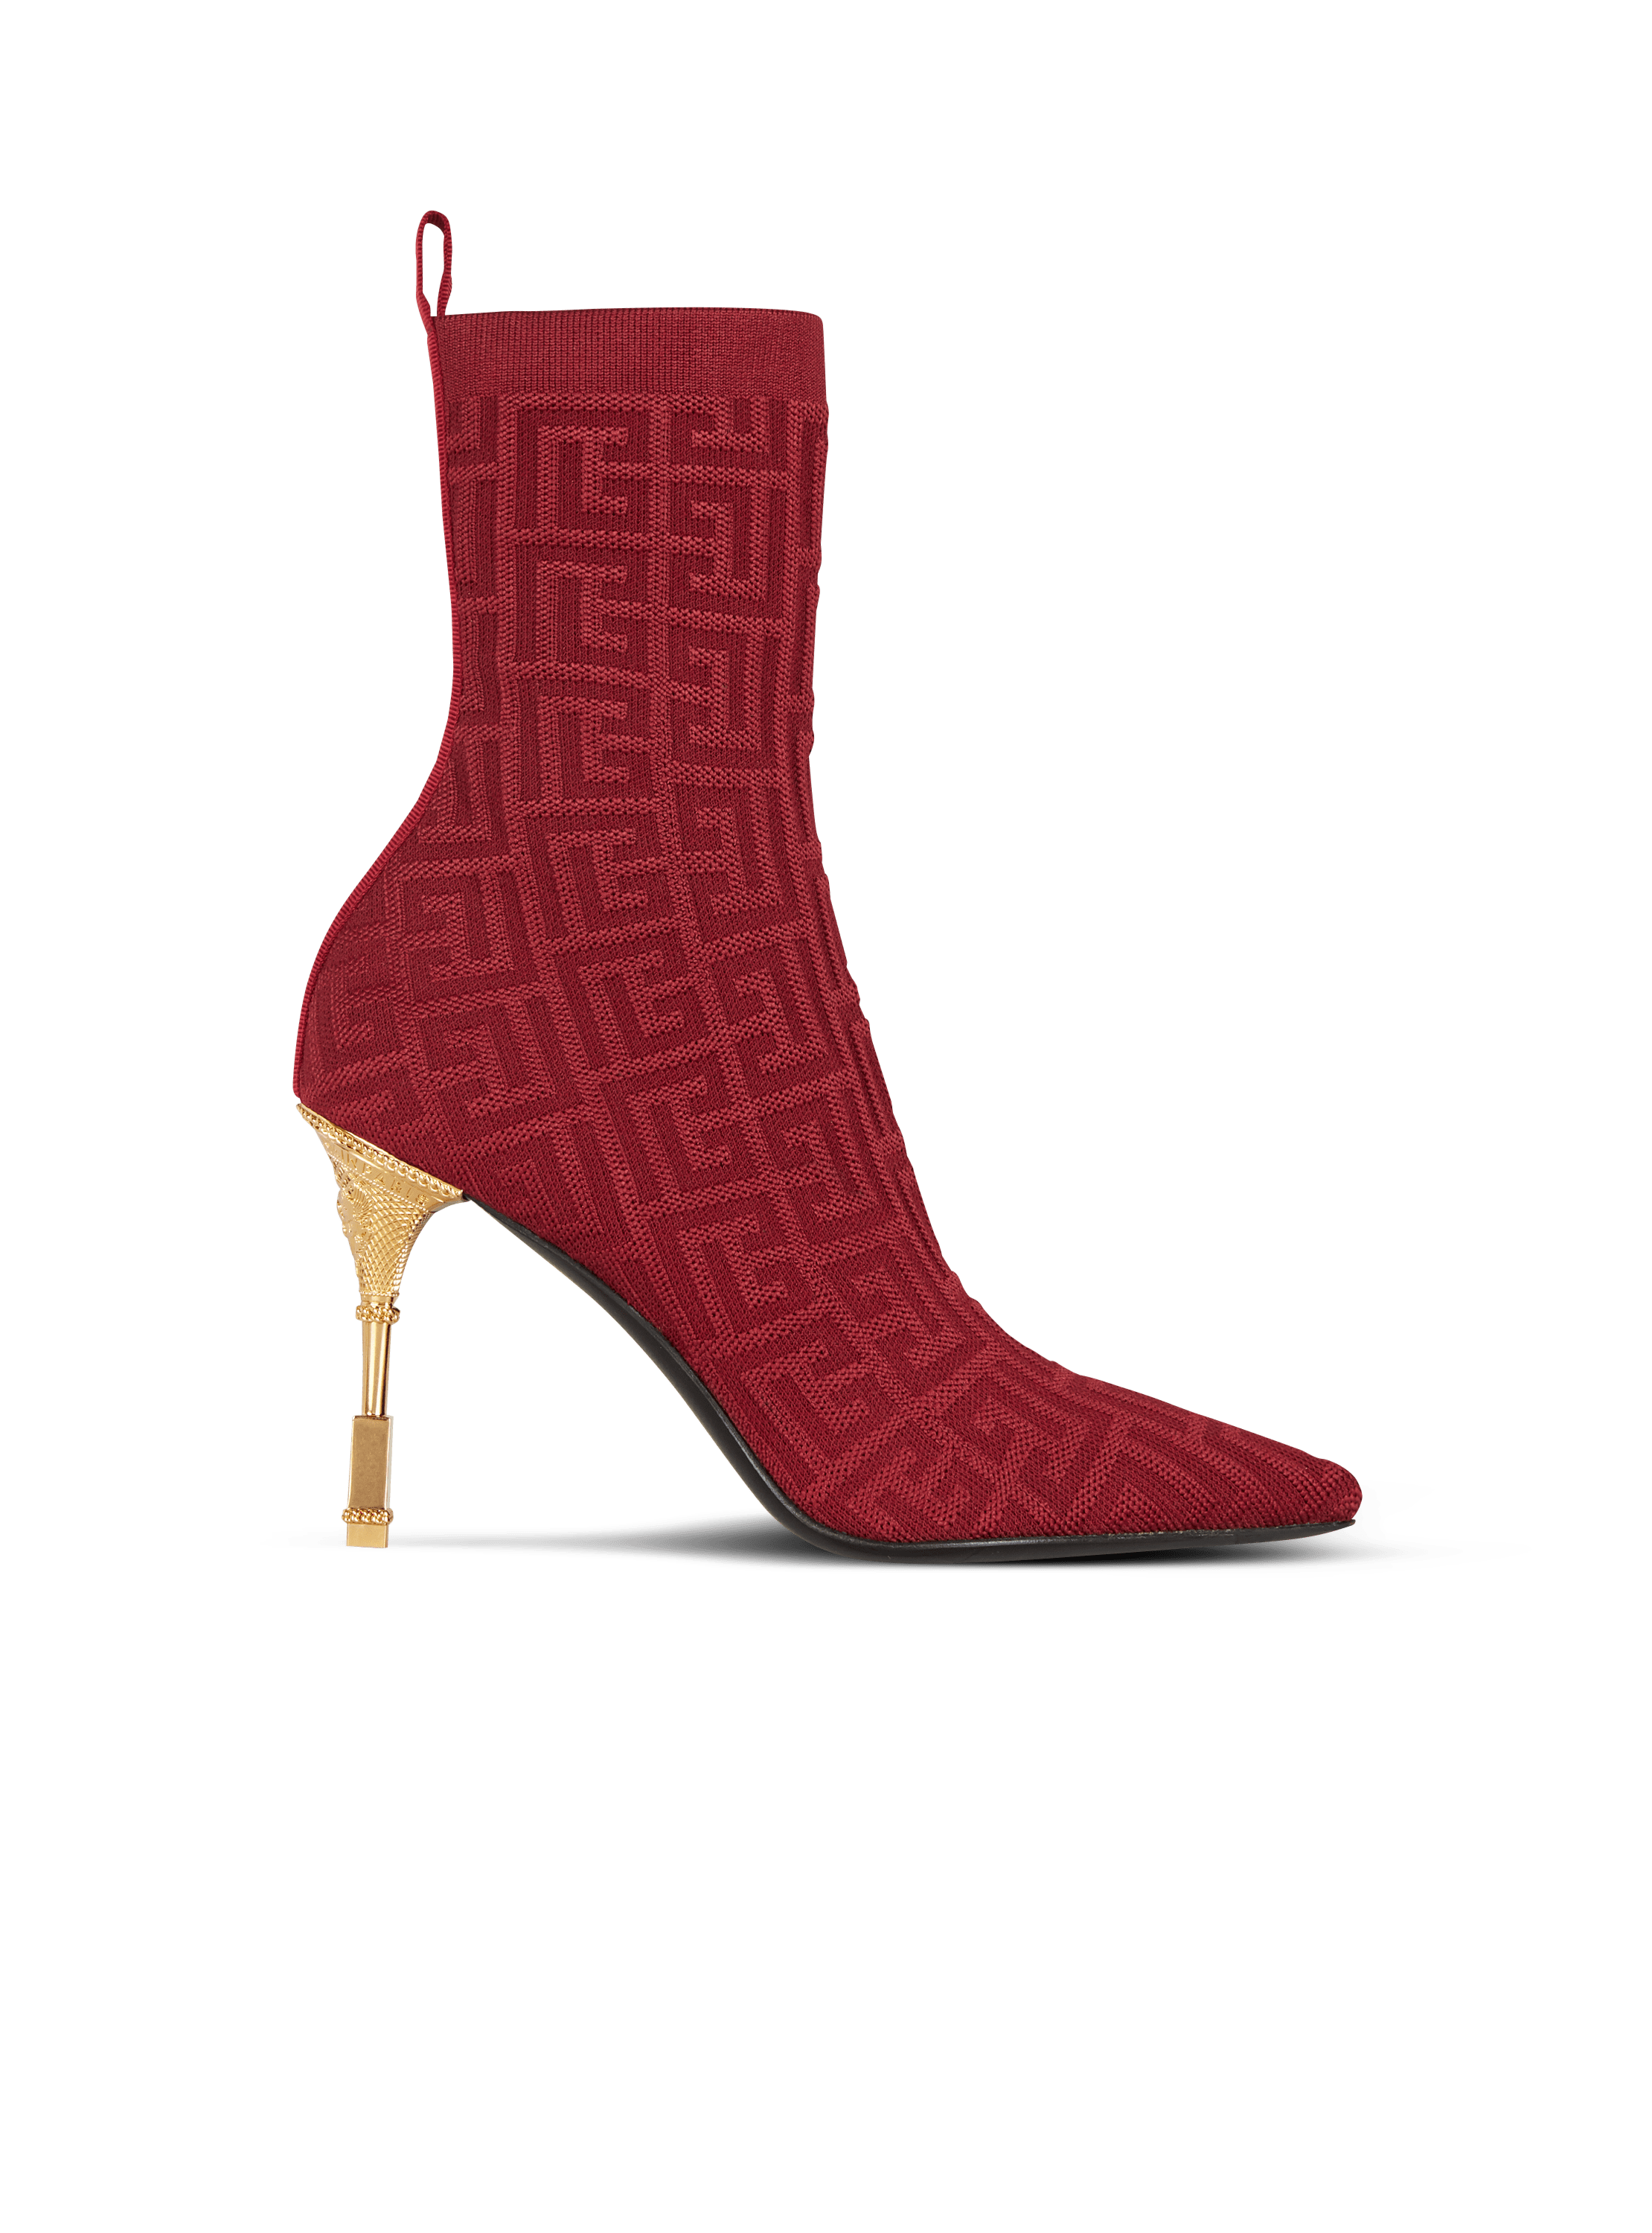 Moneta monogrammed knit ankle boots, red, hi-res